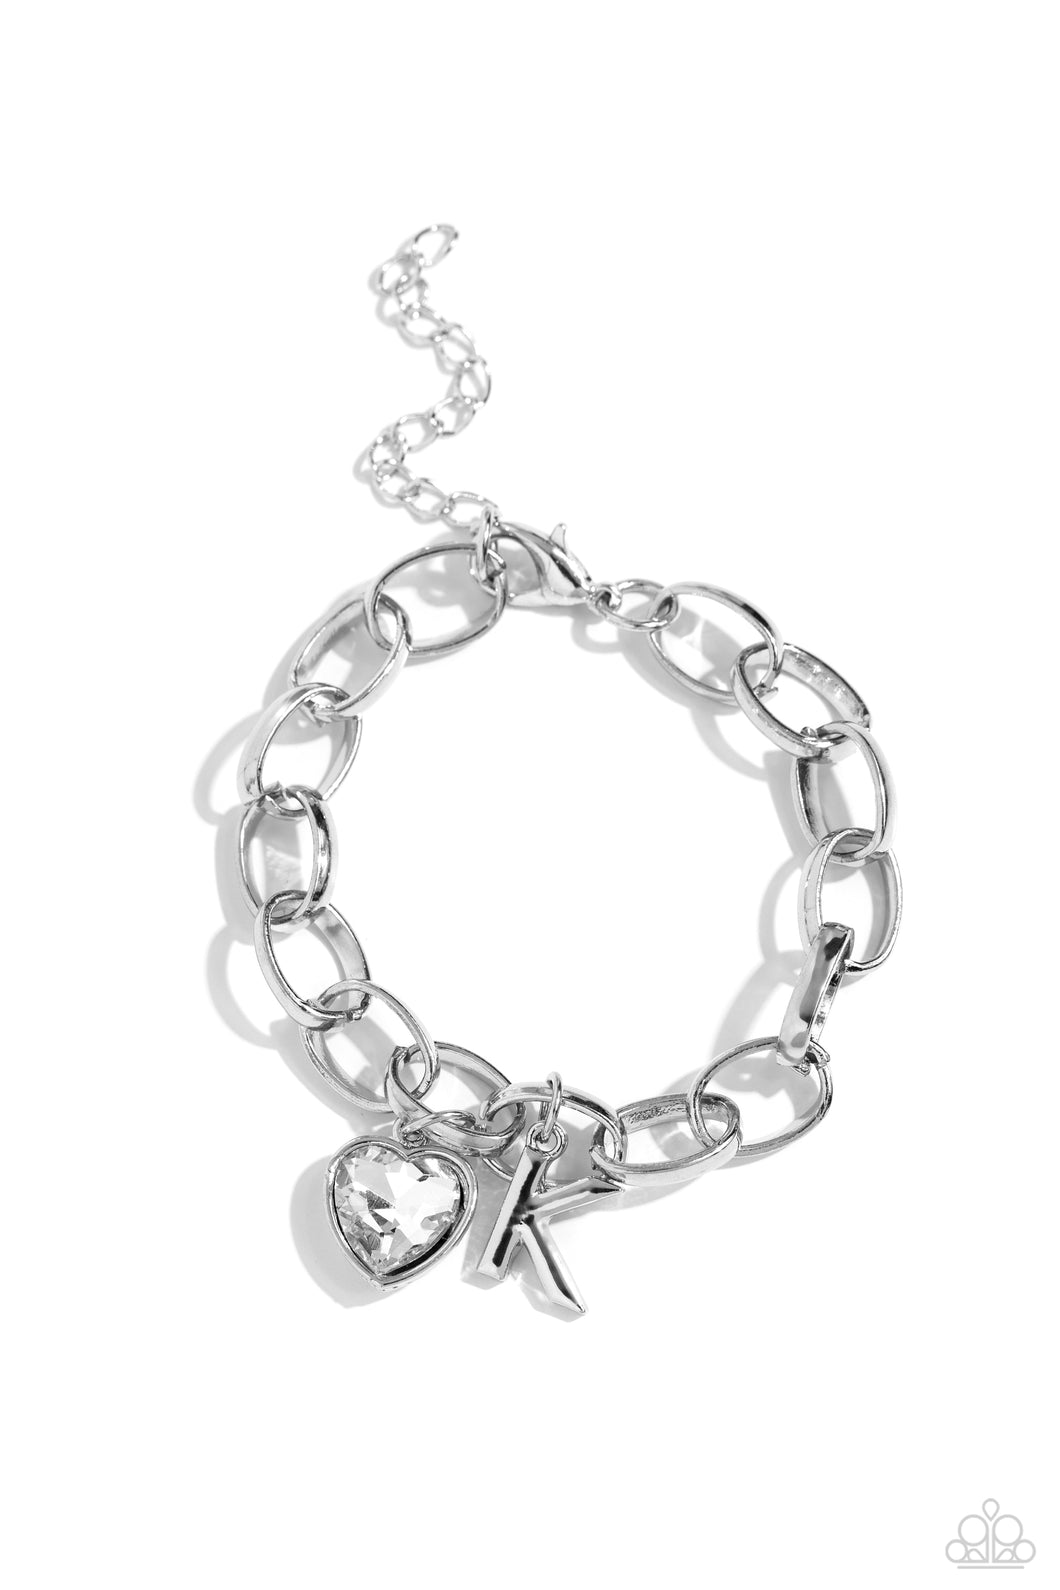 Guess Now Its INITIAL - White - K Bracelet